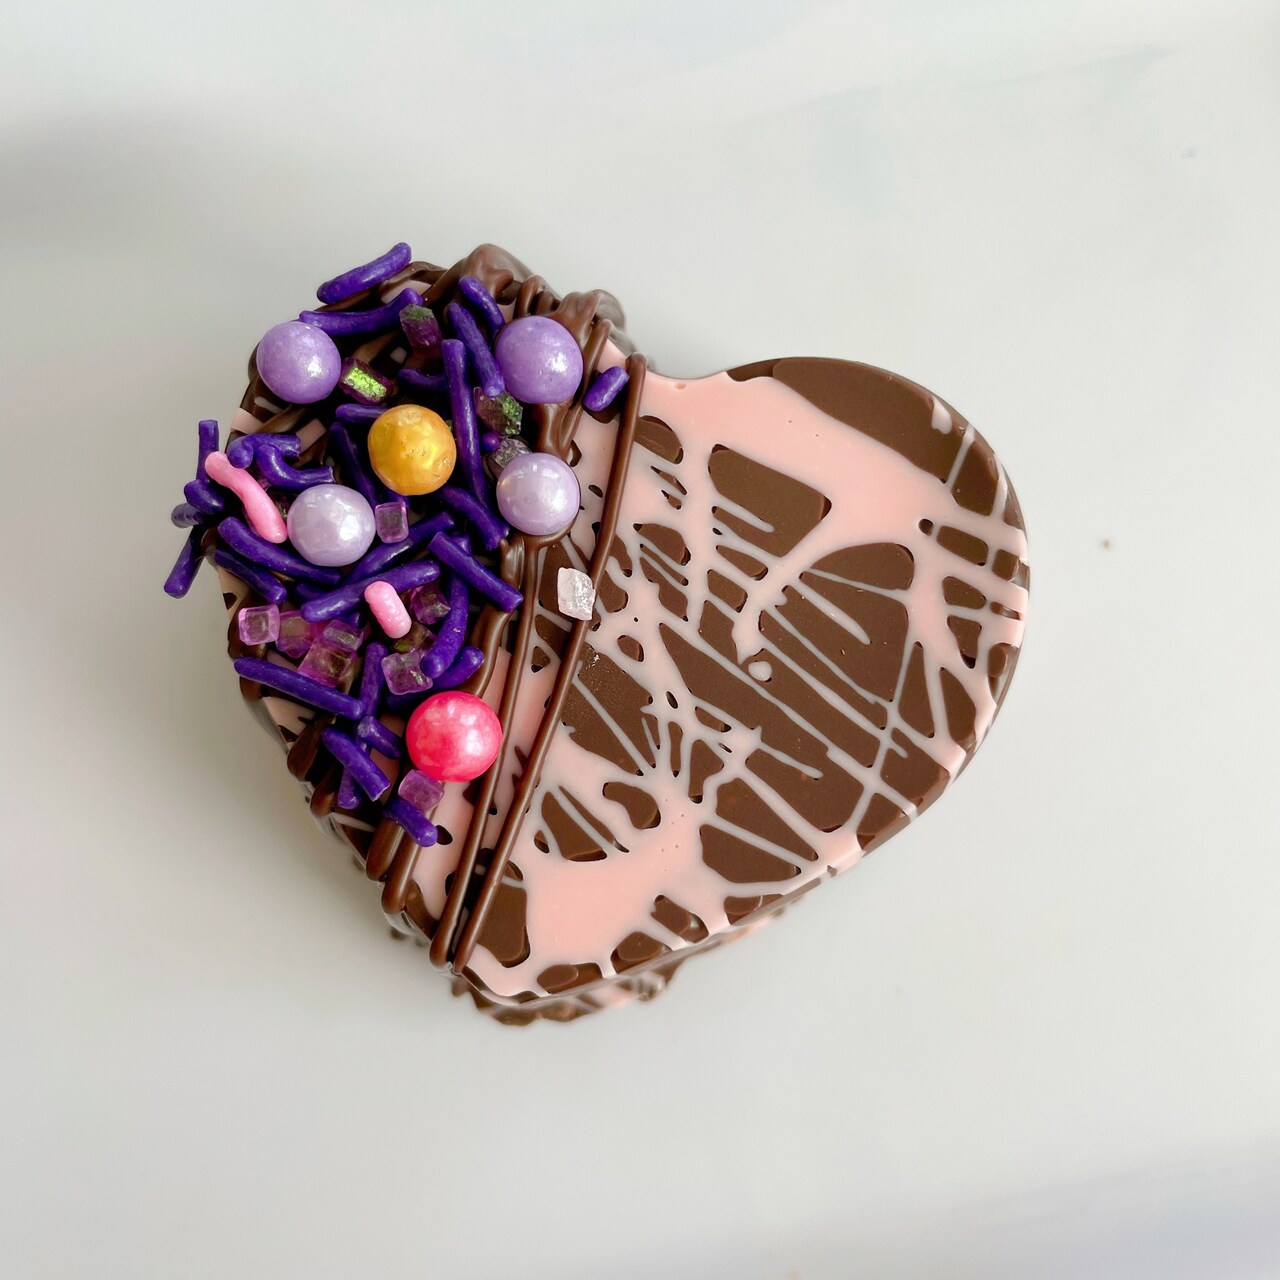 Mini Heart Chocolate Covered Cakes with @wildbakes